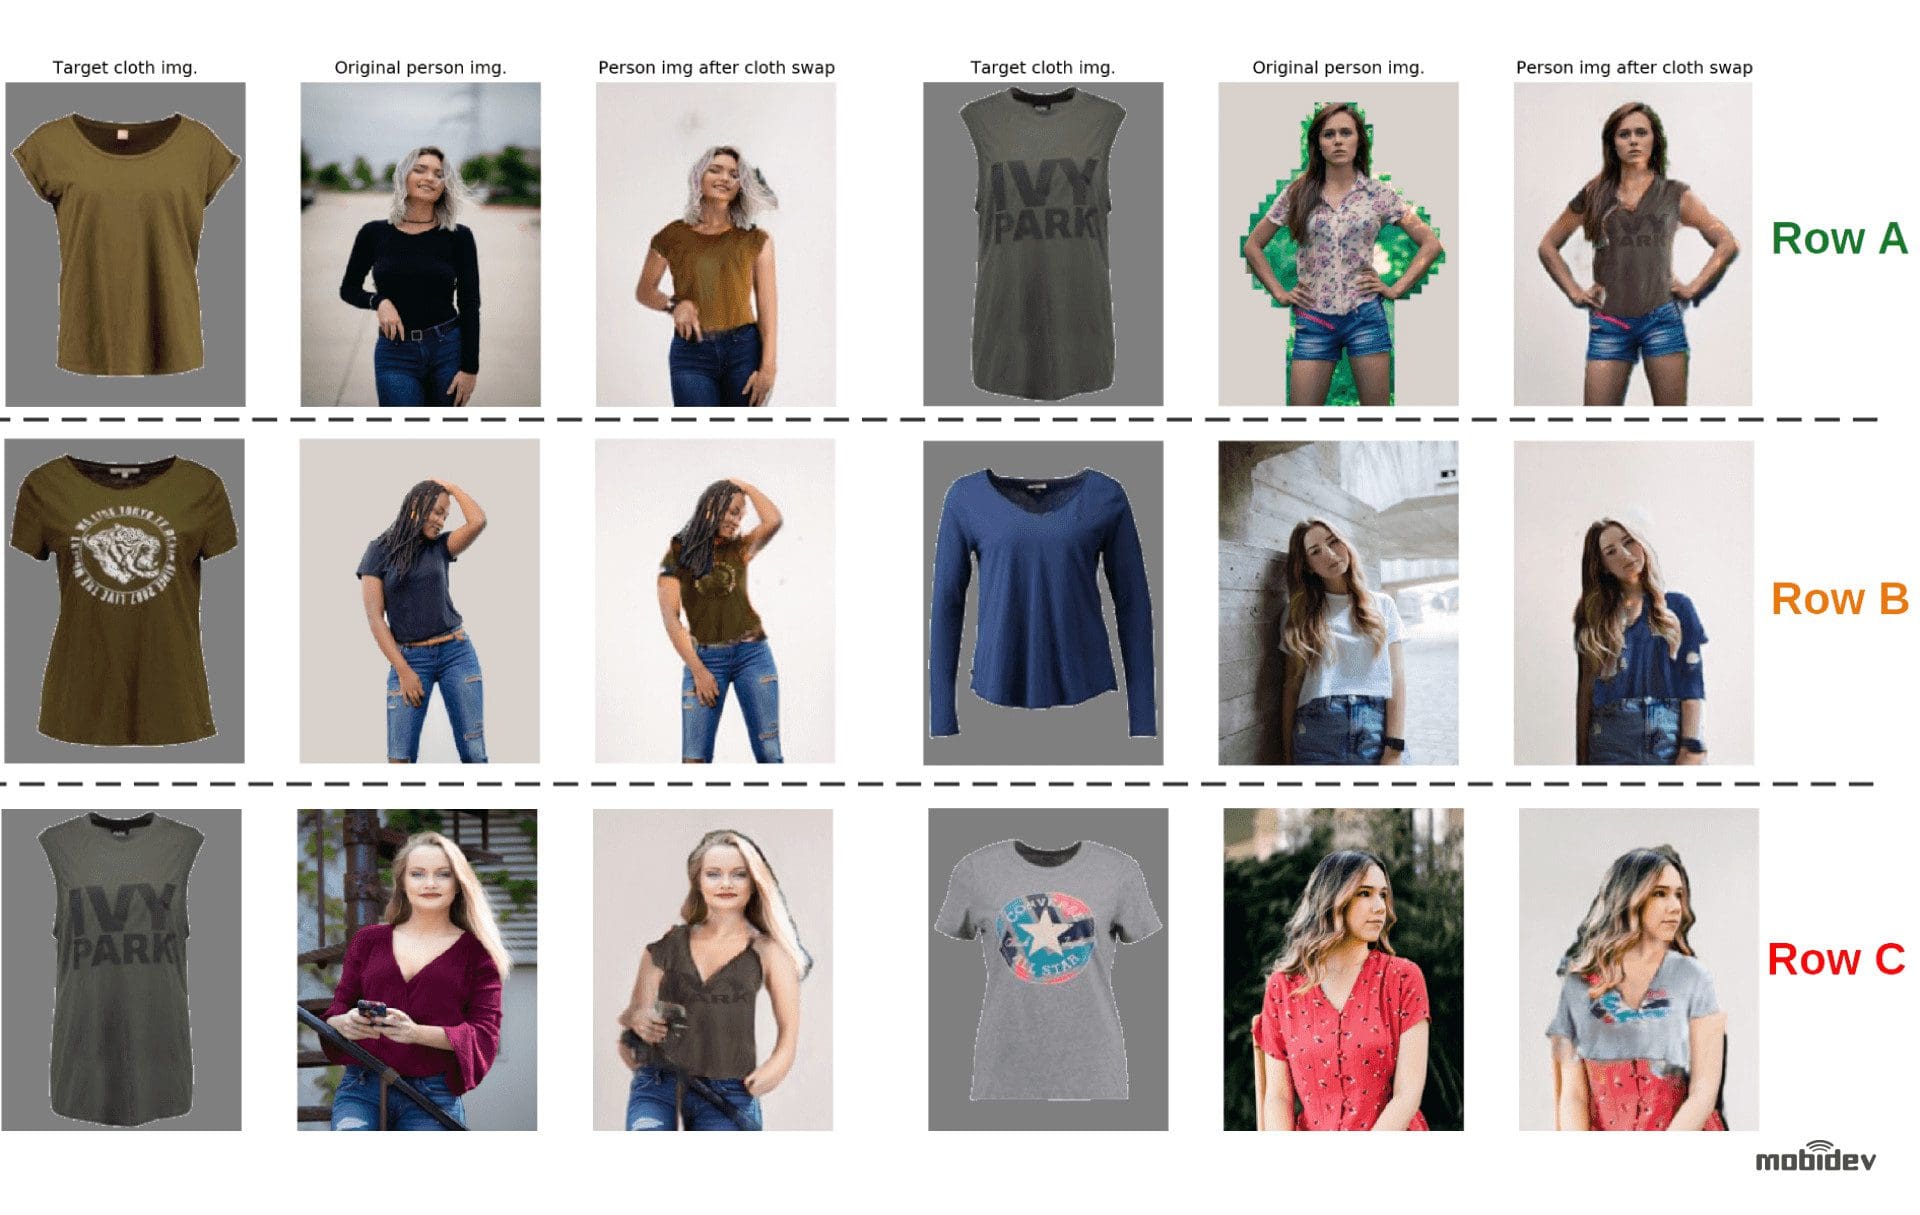 Outputs of clothing replacement on images with unconstrained environment